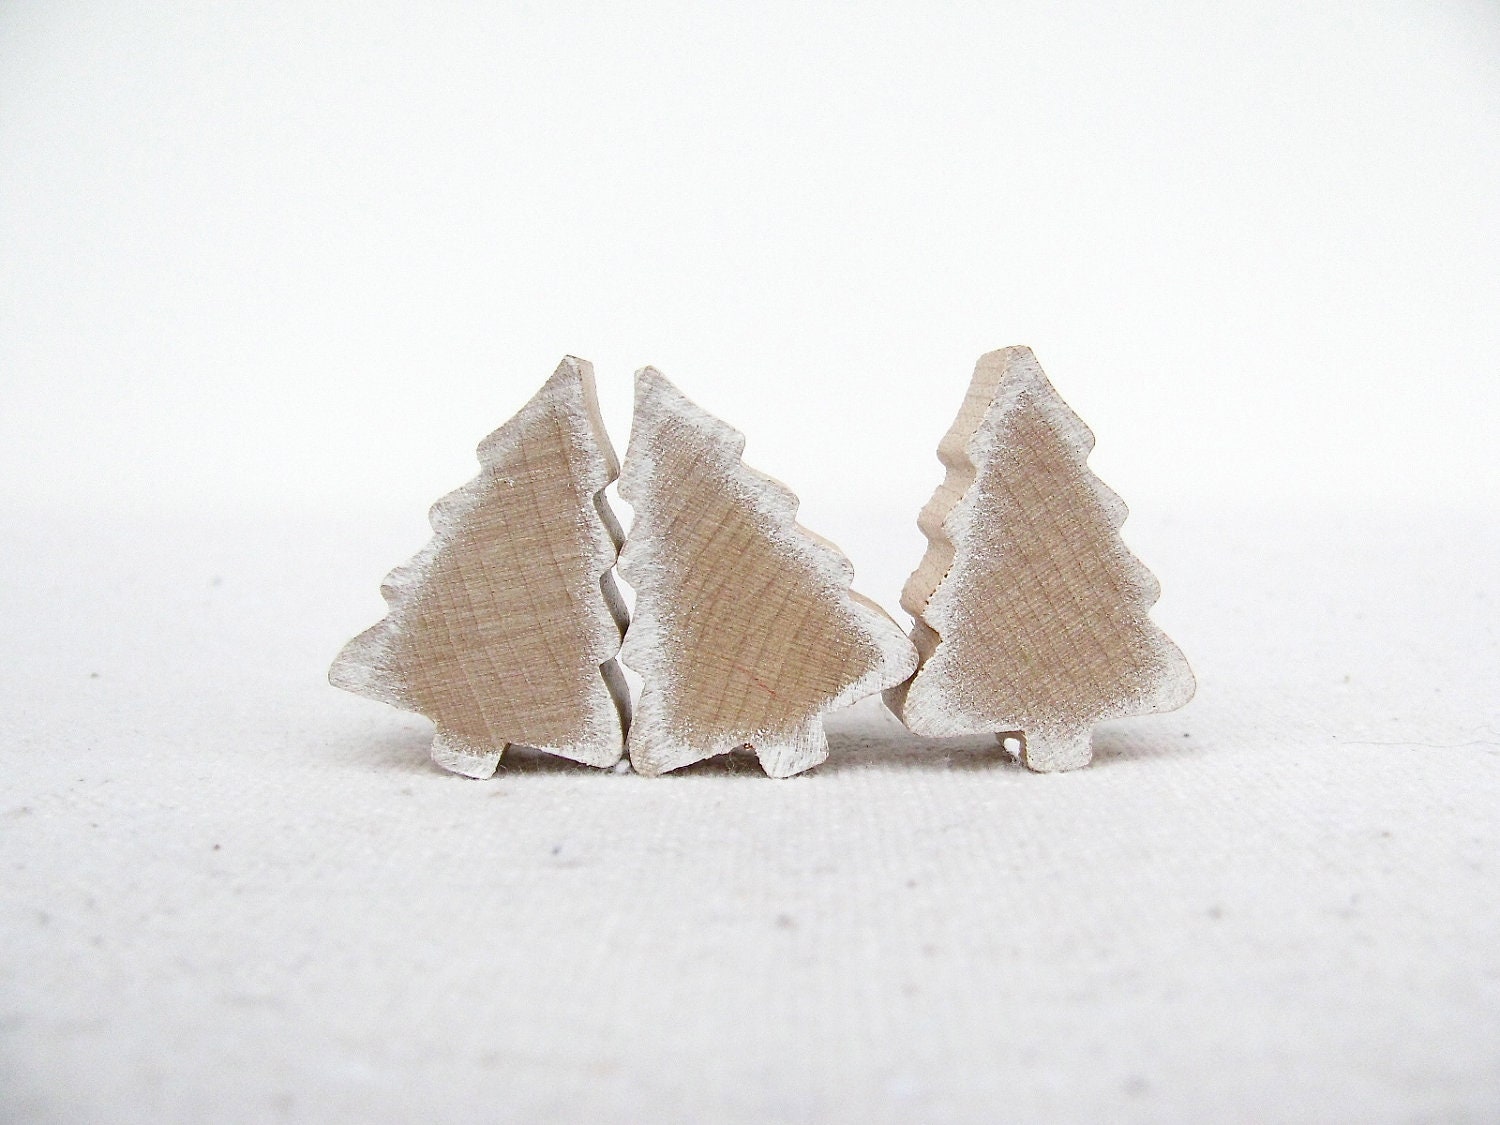 White Christmas Tree Magnets - Cottage Chic - Shabby Chic - Wooden Magnets - Christmas Decoration -  Stocking Stuffer set of 3 - RevellHouse